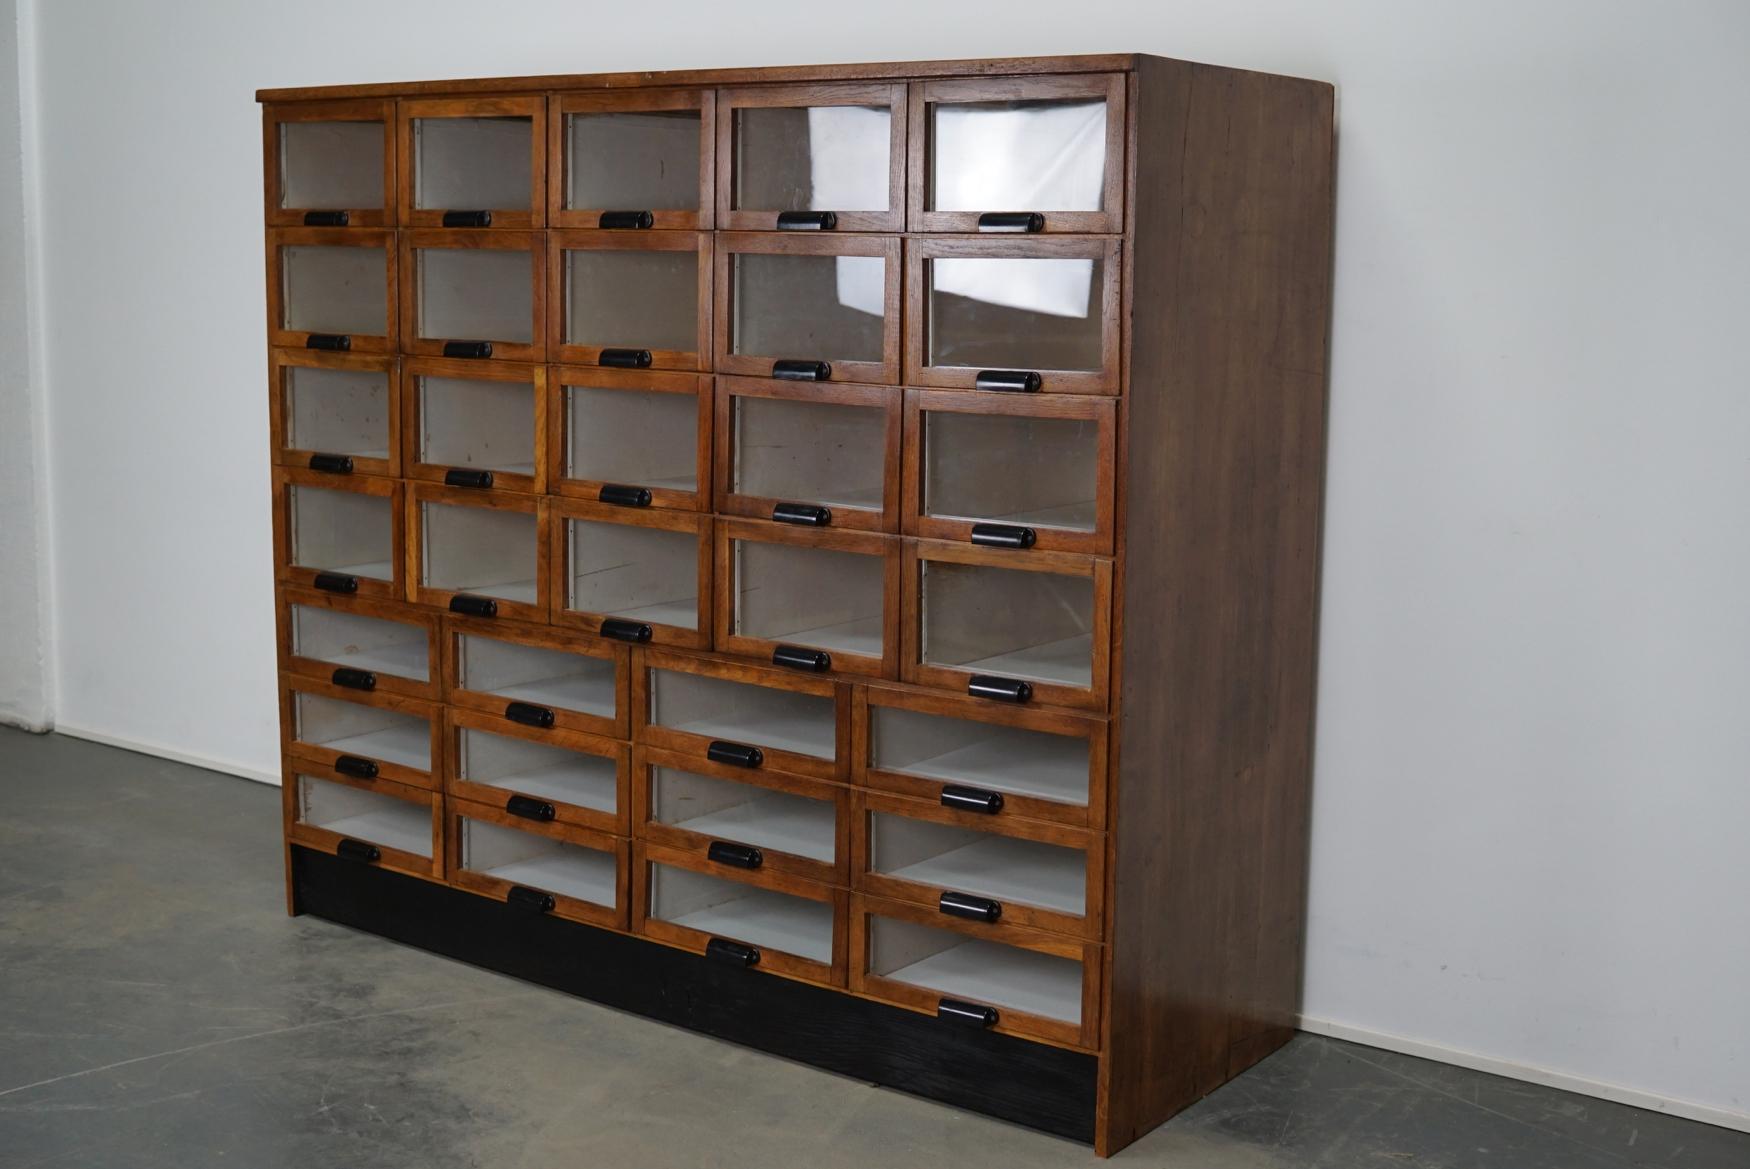 This haberdashery cabinet was produced during the 1950s in the Netherlands. This piece features 32 drawers with glass fronts and Bakelite handles. It was originally used in a shop for sewing supplies and fabrics. The interior dimensions of the